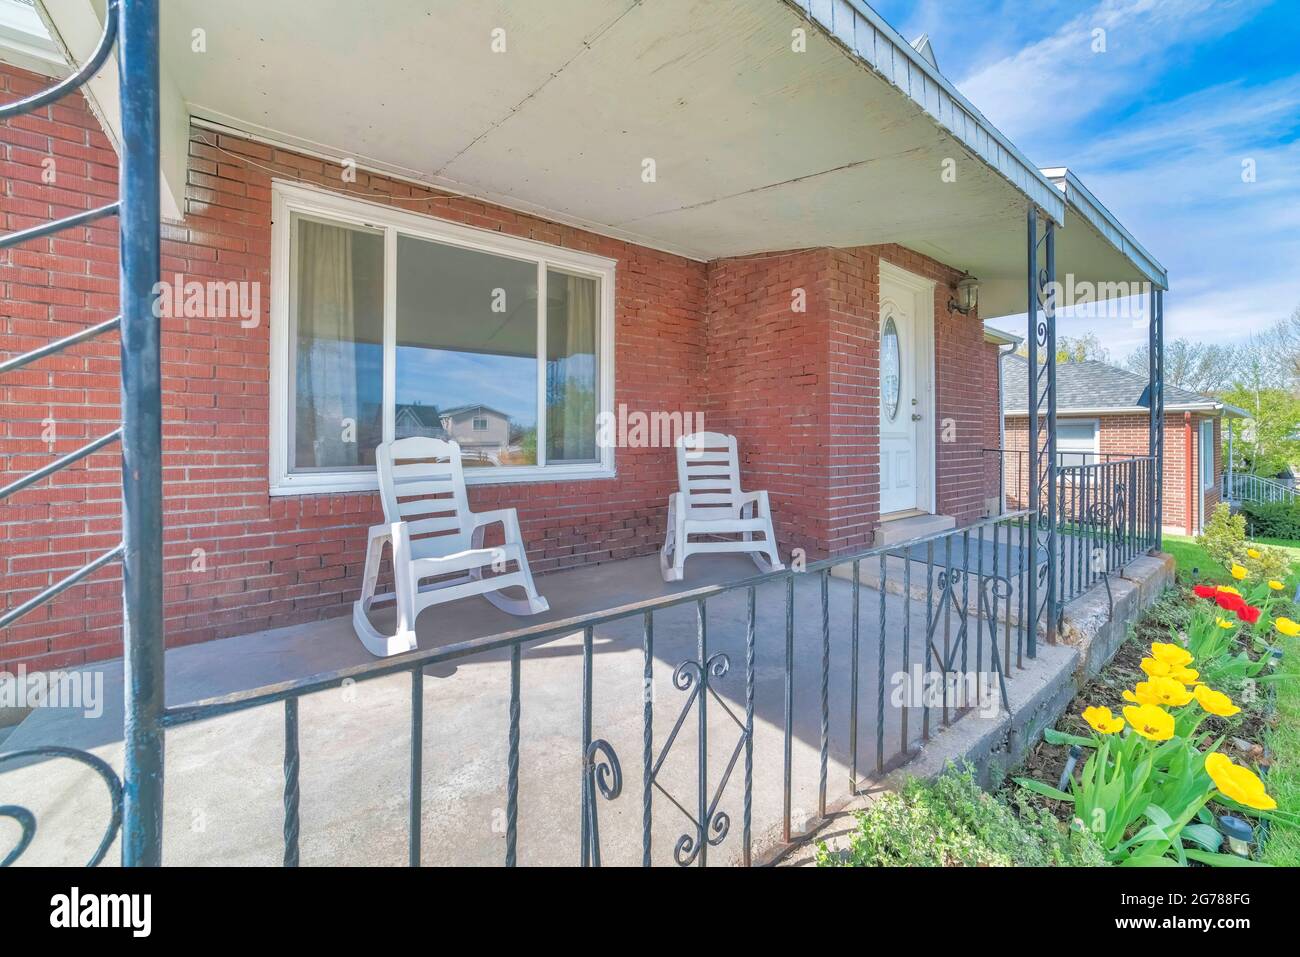 Rocking chairs on the front porch of a house with red brick wall and white door Stock Photo